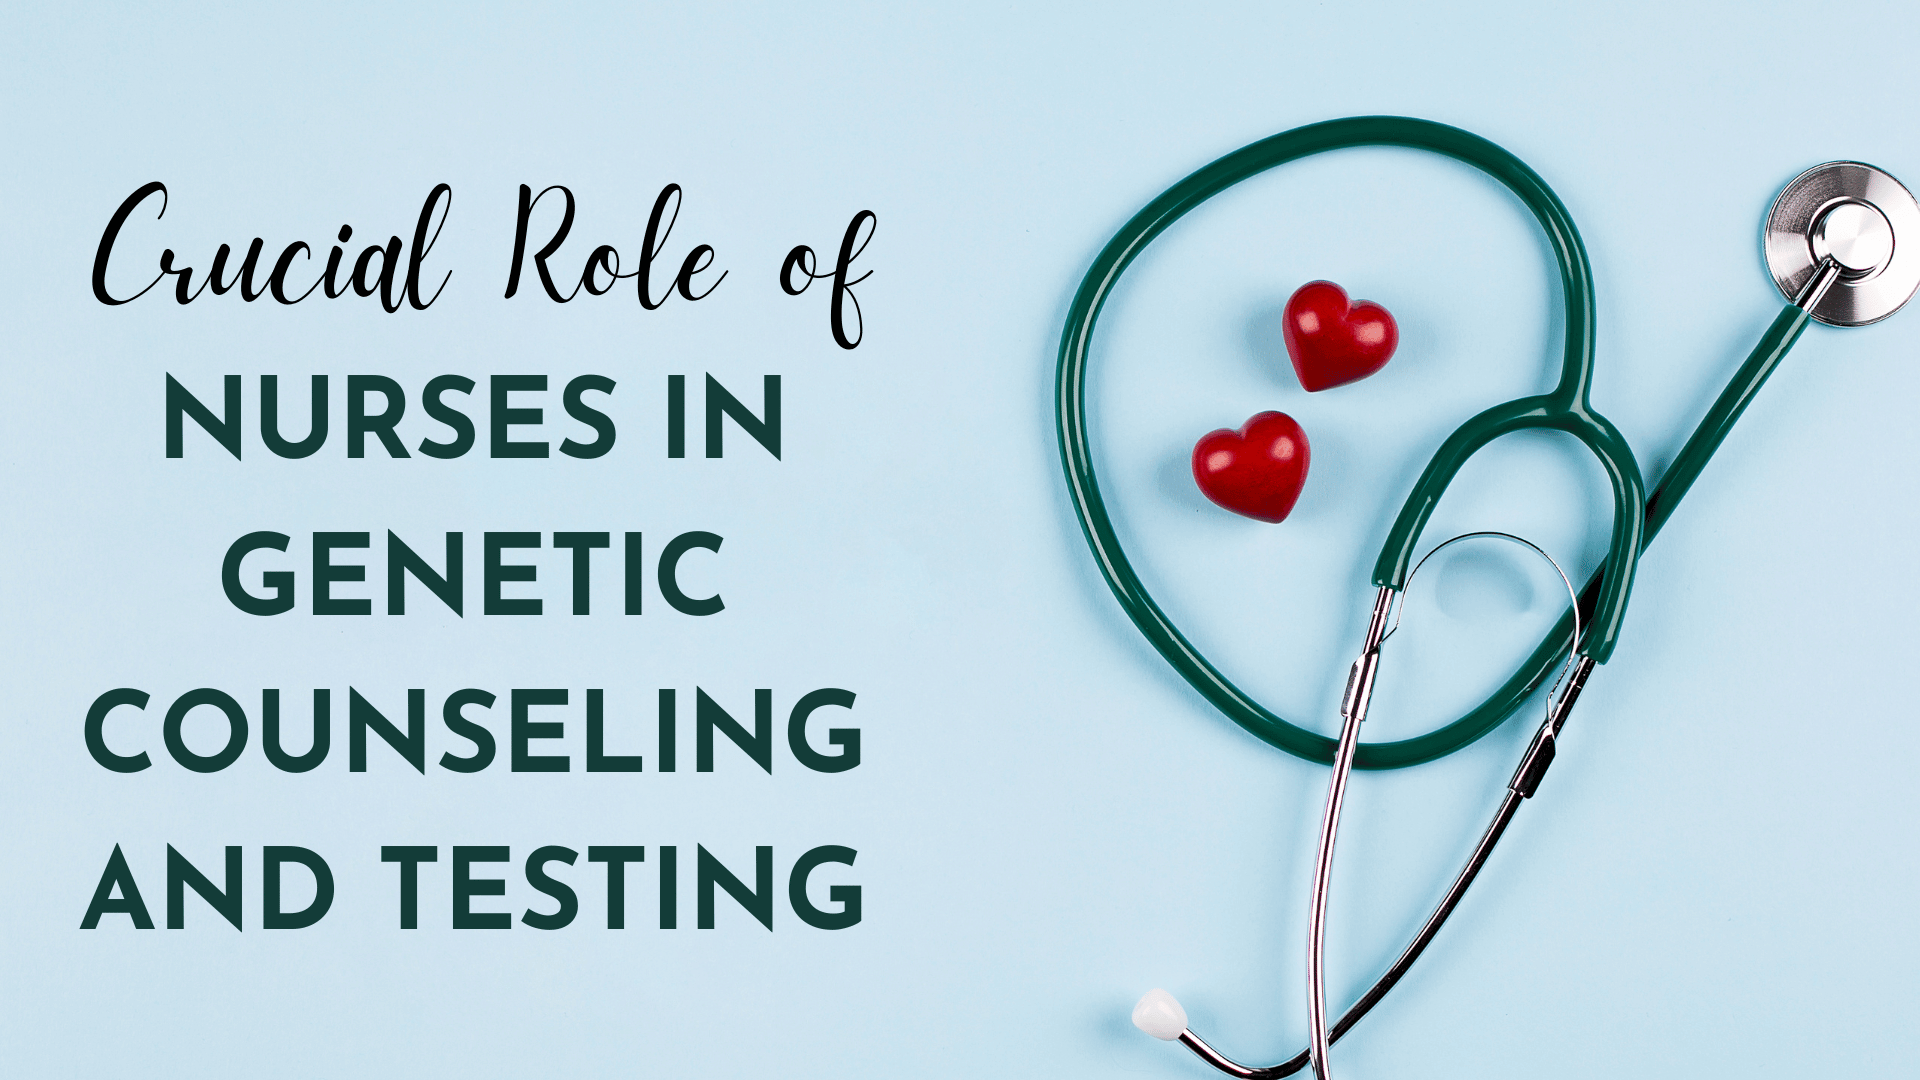 Crucial Role of Nurses in Genetic Counseling and Testing